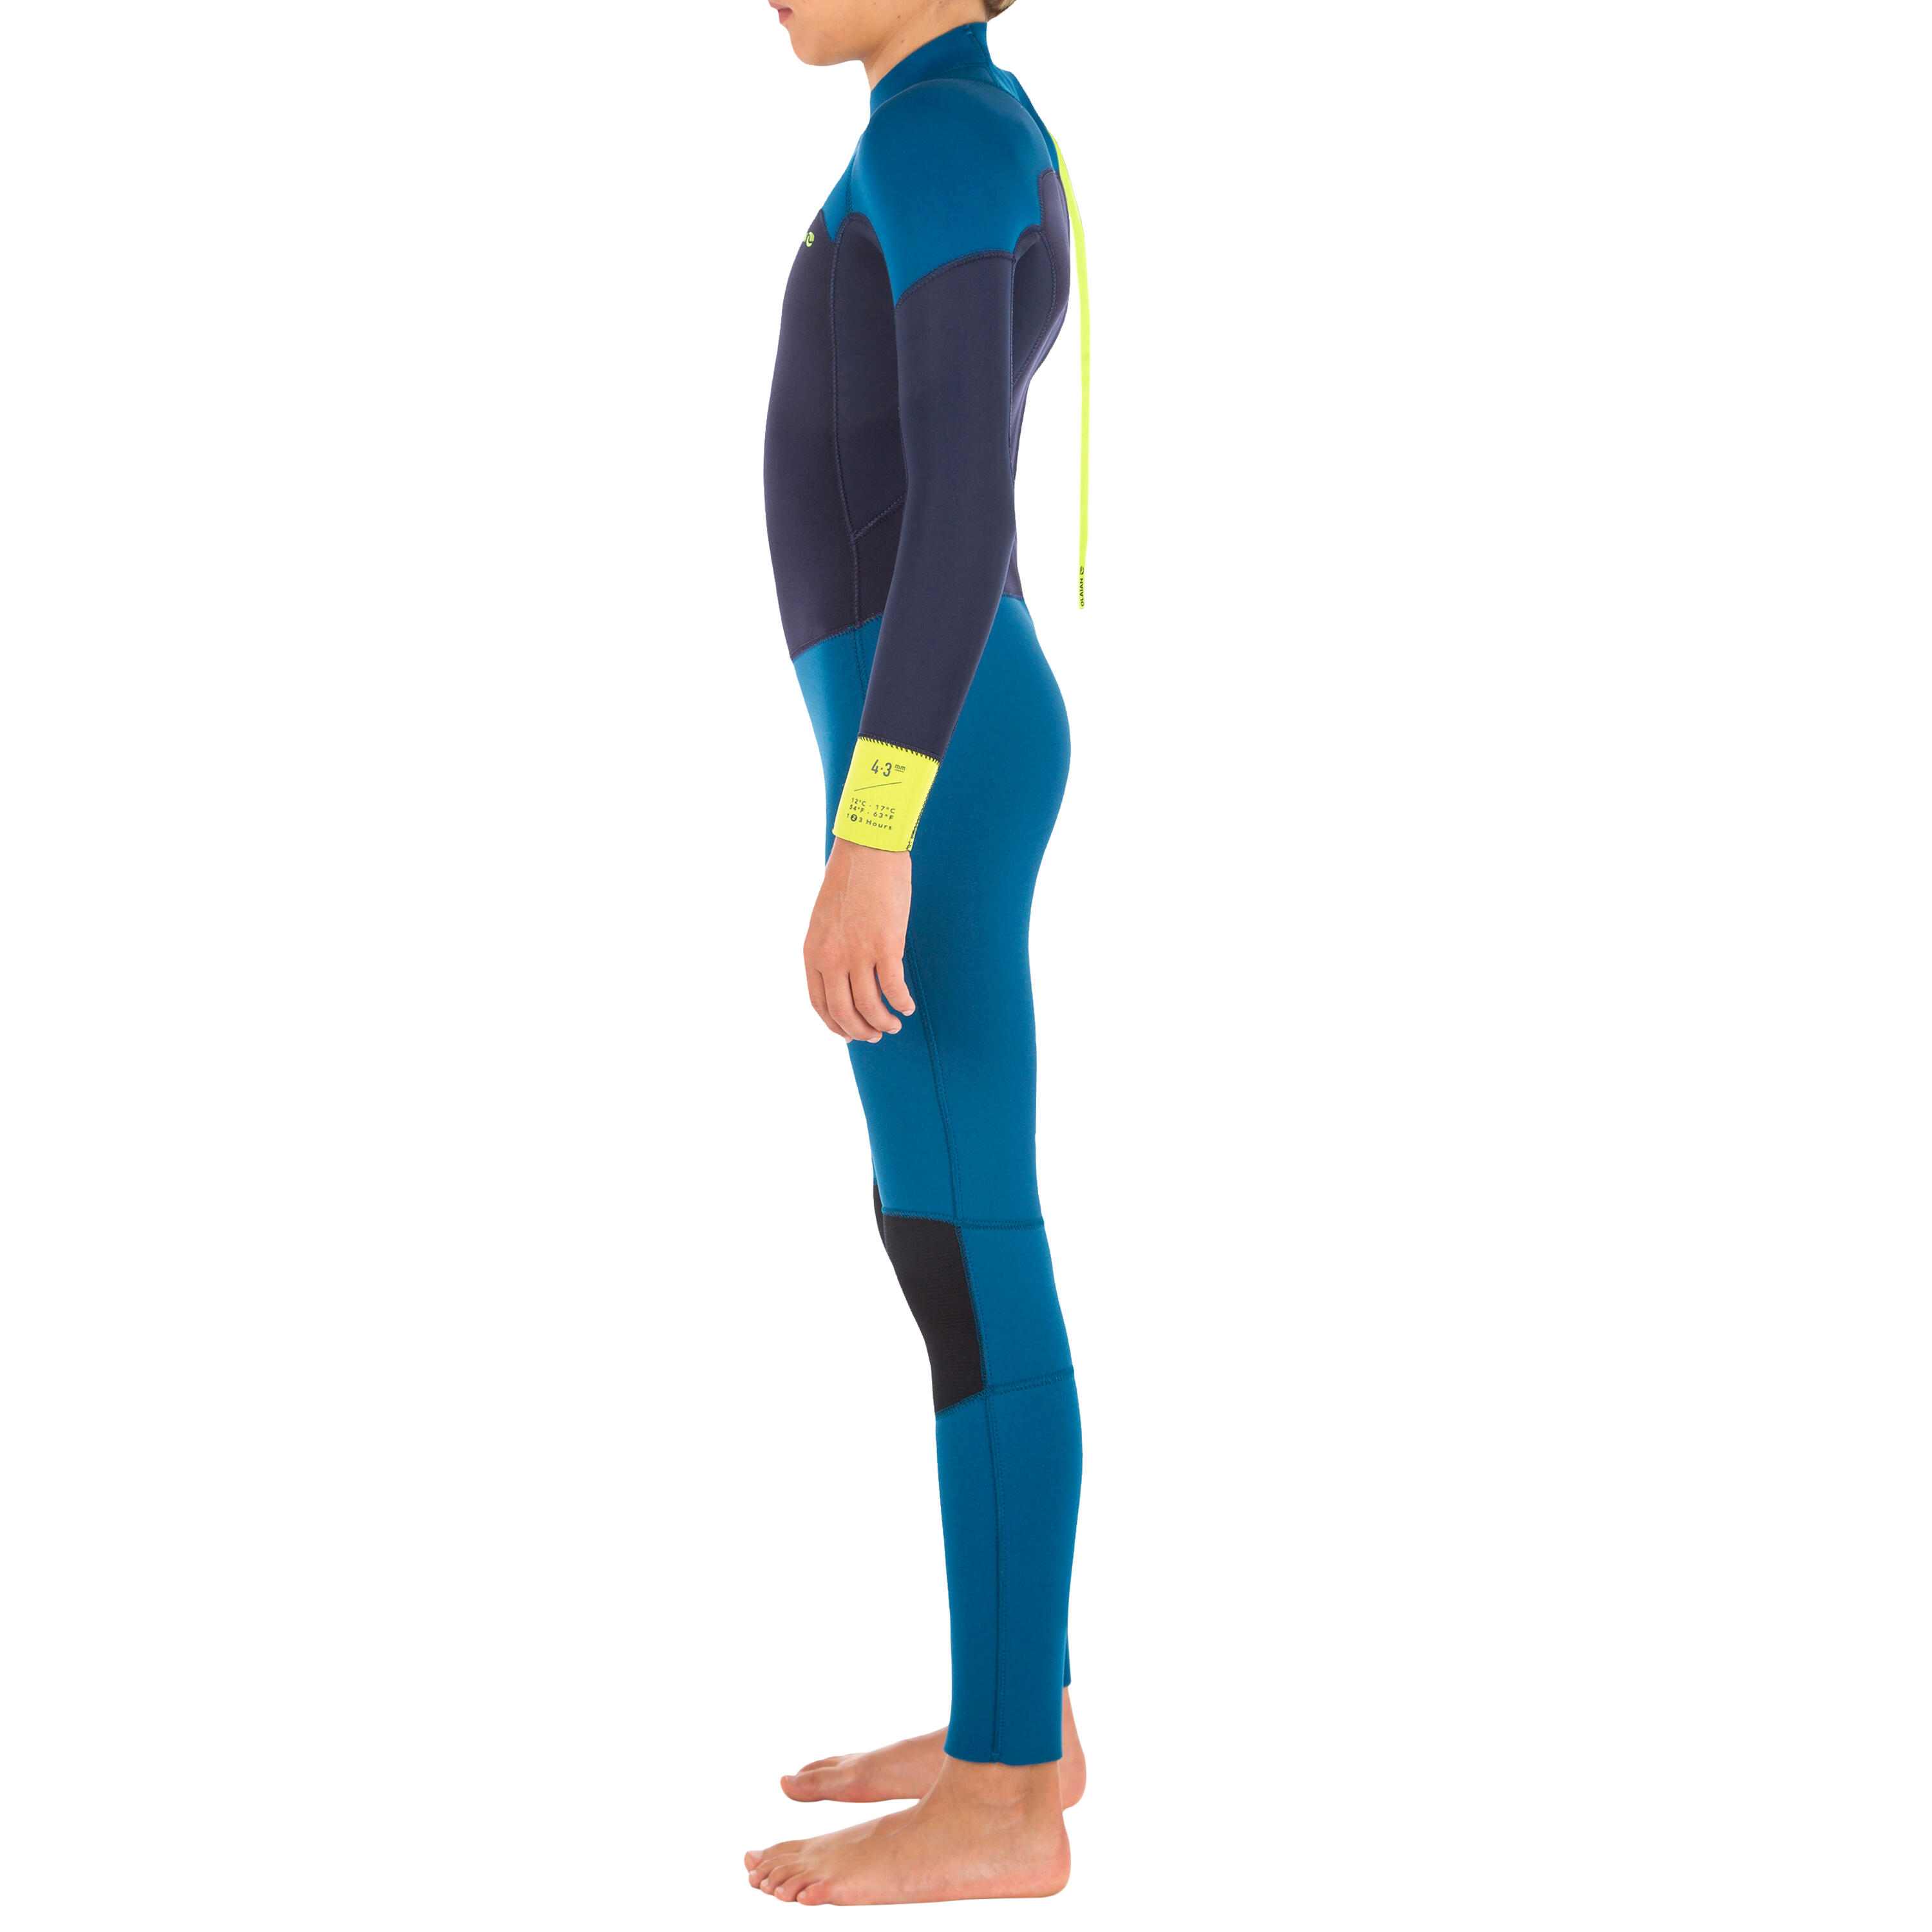 Child's surfing wetsuit 4/3 mm Neoprene - 500 CW Blue - OLAIAN